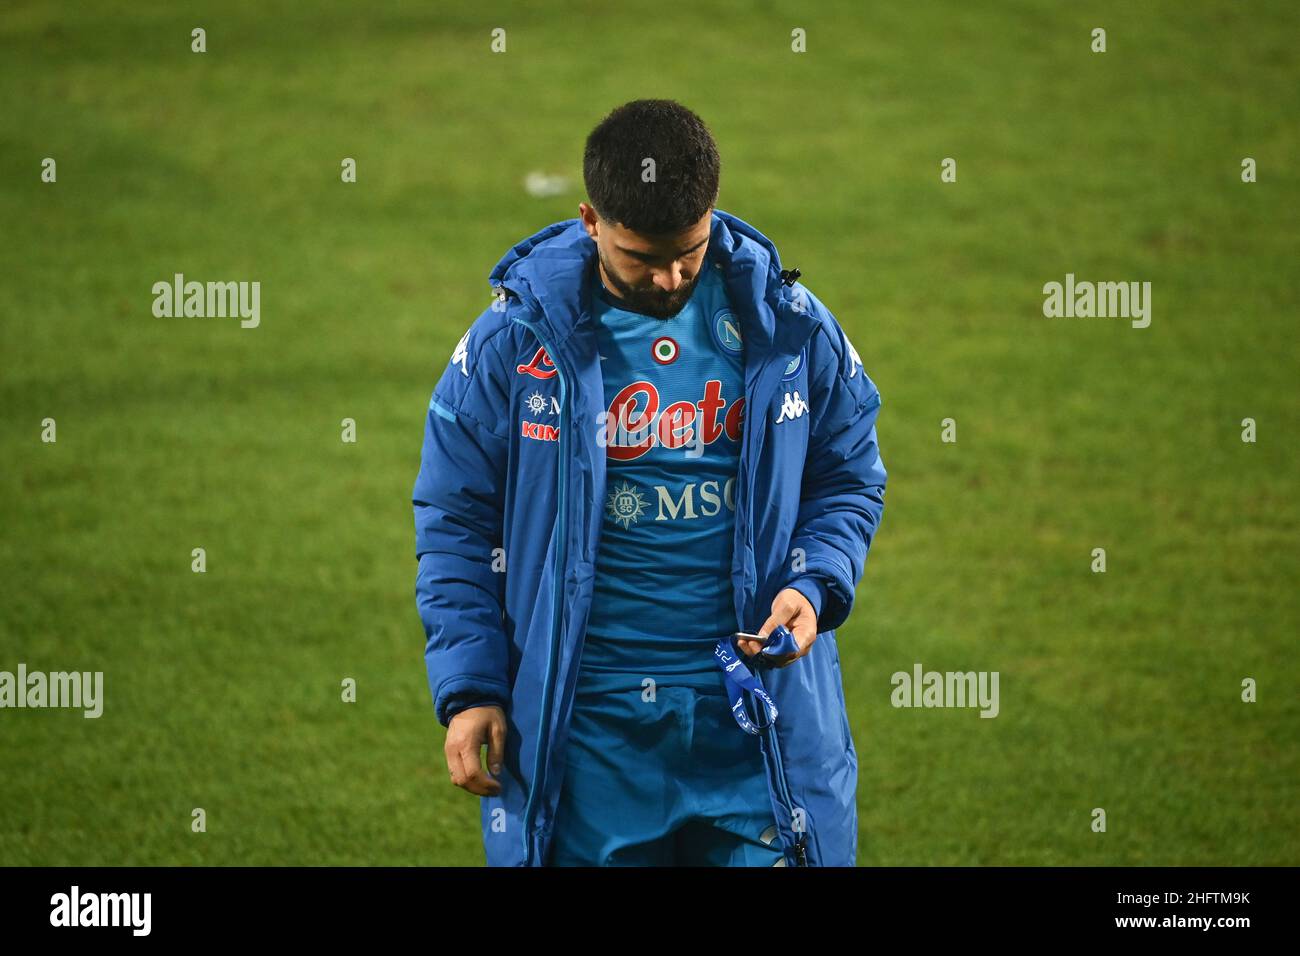 Massimo Paolone/LaPresse January 20, 2021 Reggio Emilia, Italy sport soccer Juventus vs Napoli - Final PS5 SUPERCUP Italian Super Cup 2020-21 - Mapei stadium In the pic: Lorenzo Insigne (SSC Napoli) leaves the field with head down at the end of the match Stock Photo